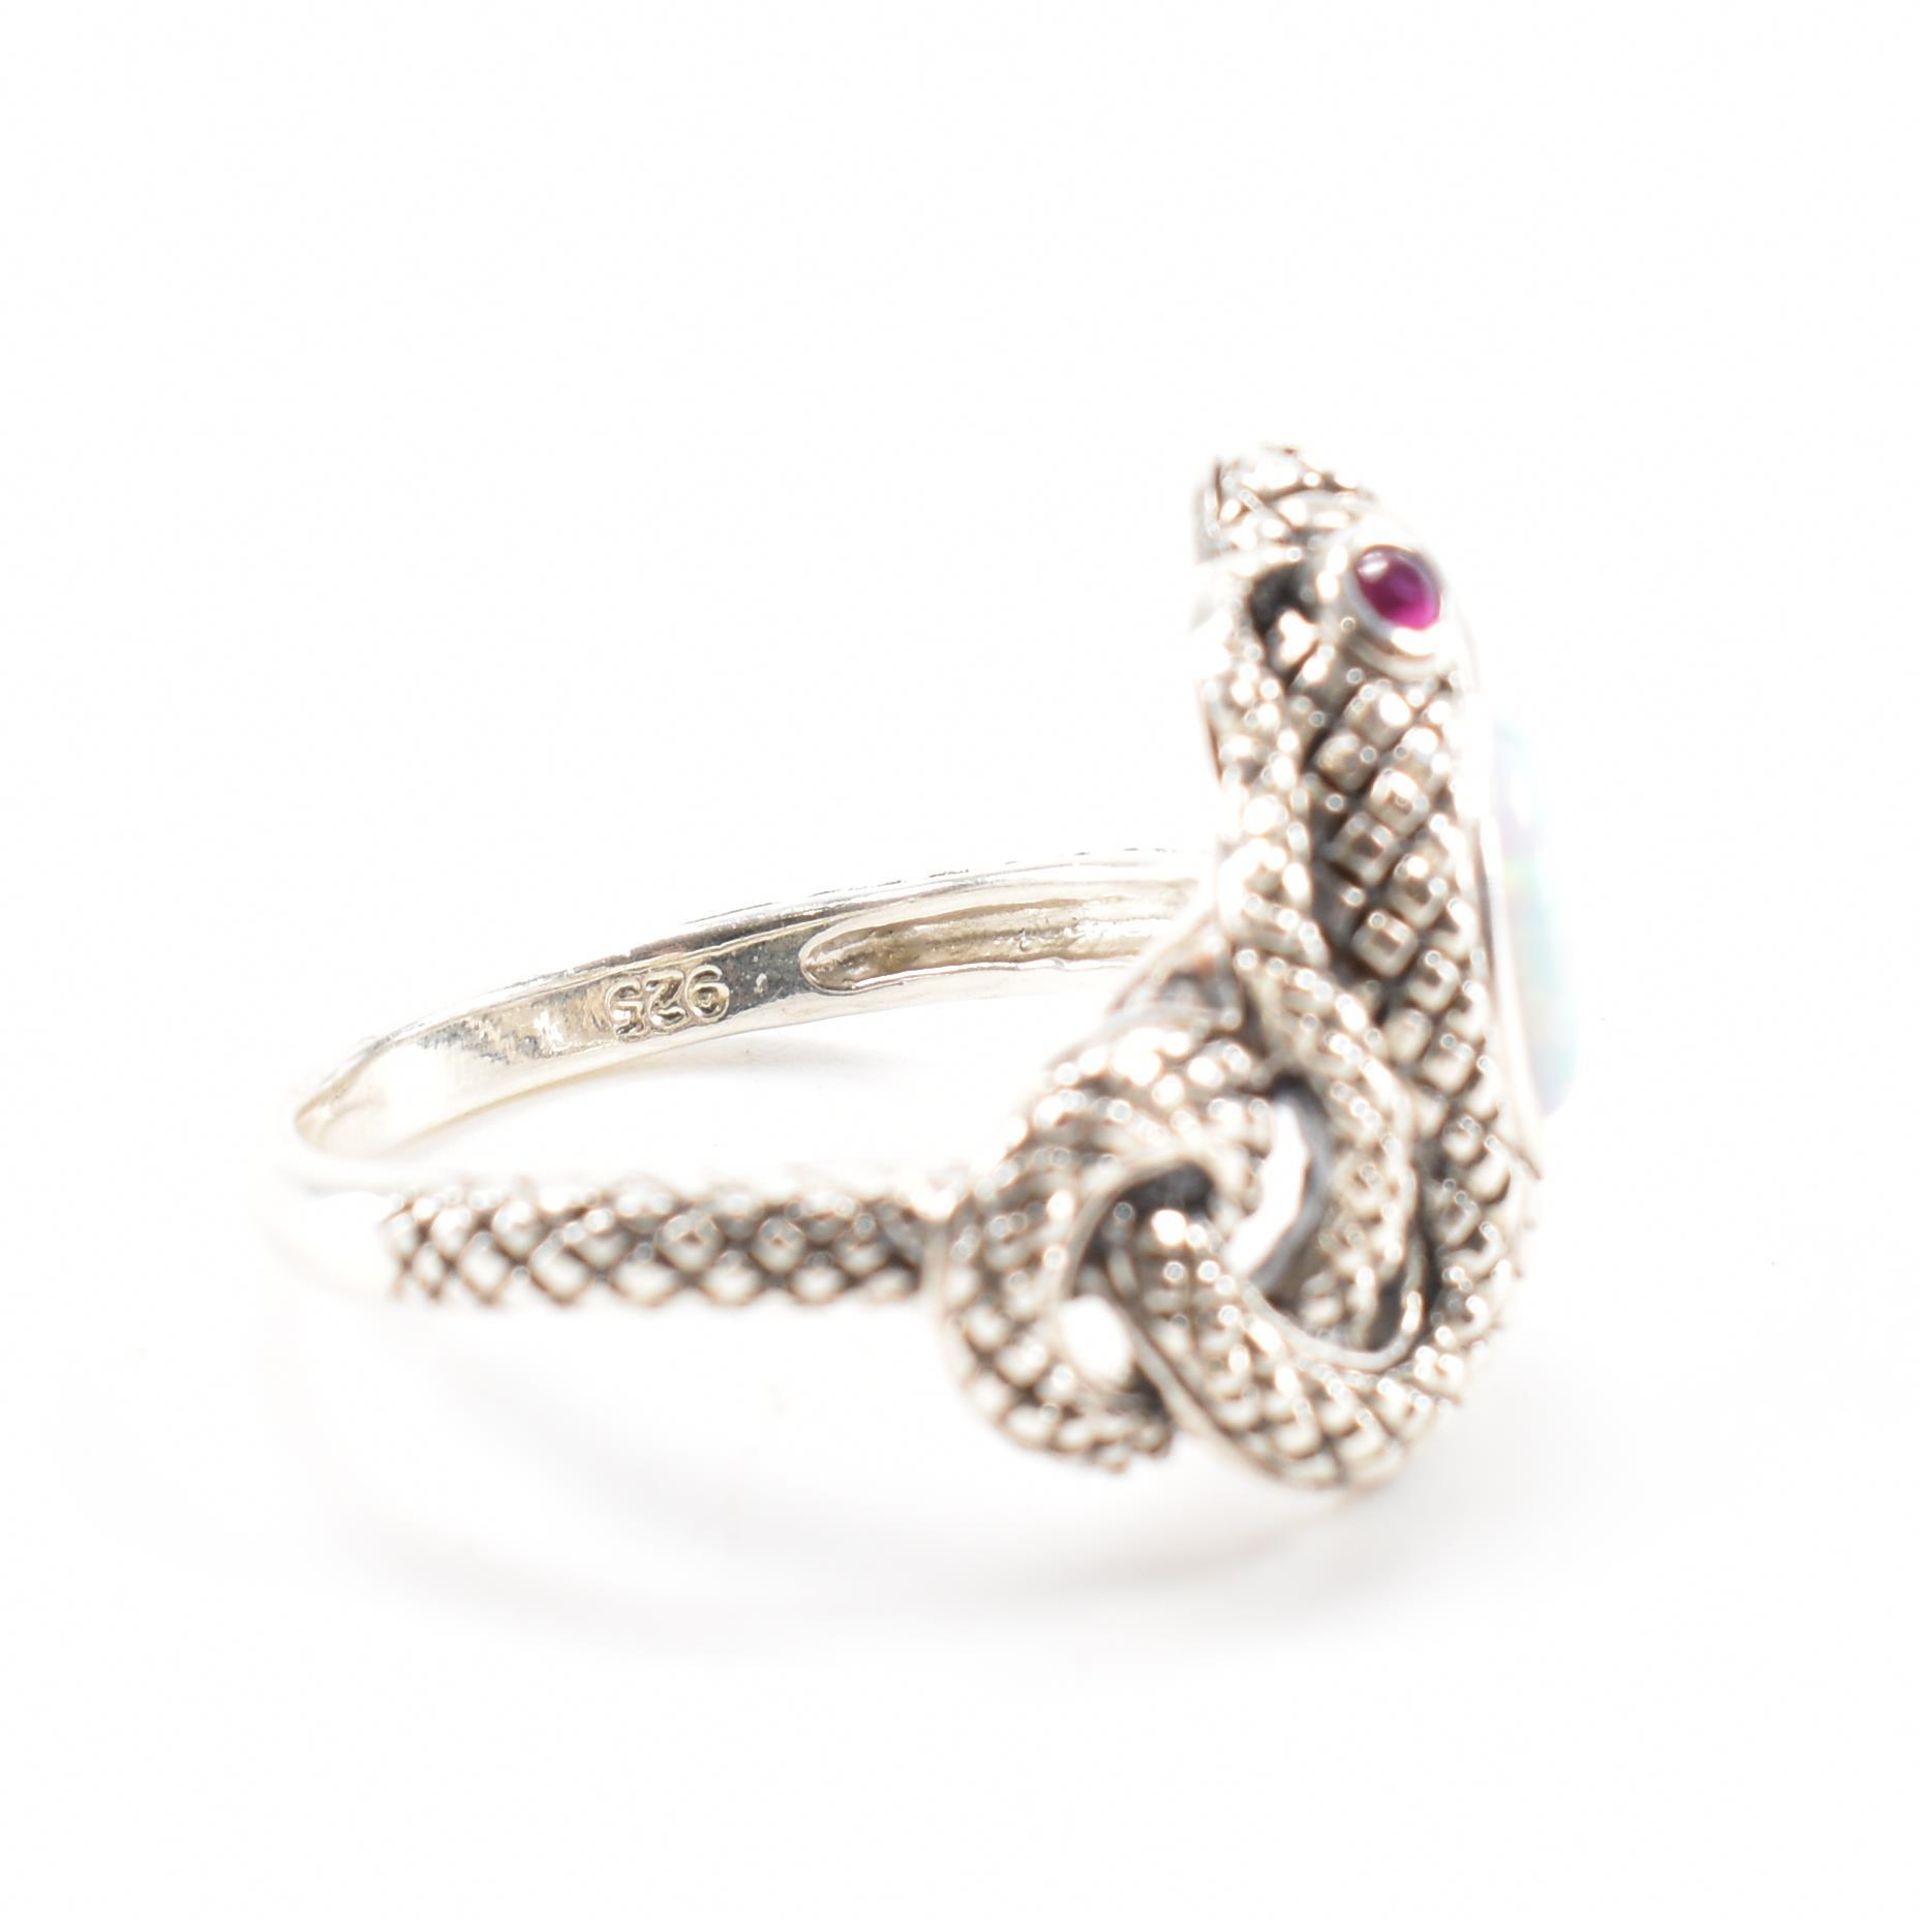 925 SILVER OPALITE & RUBY SNAKE RING - Image 7 of 7